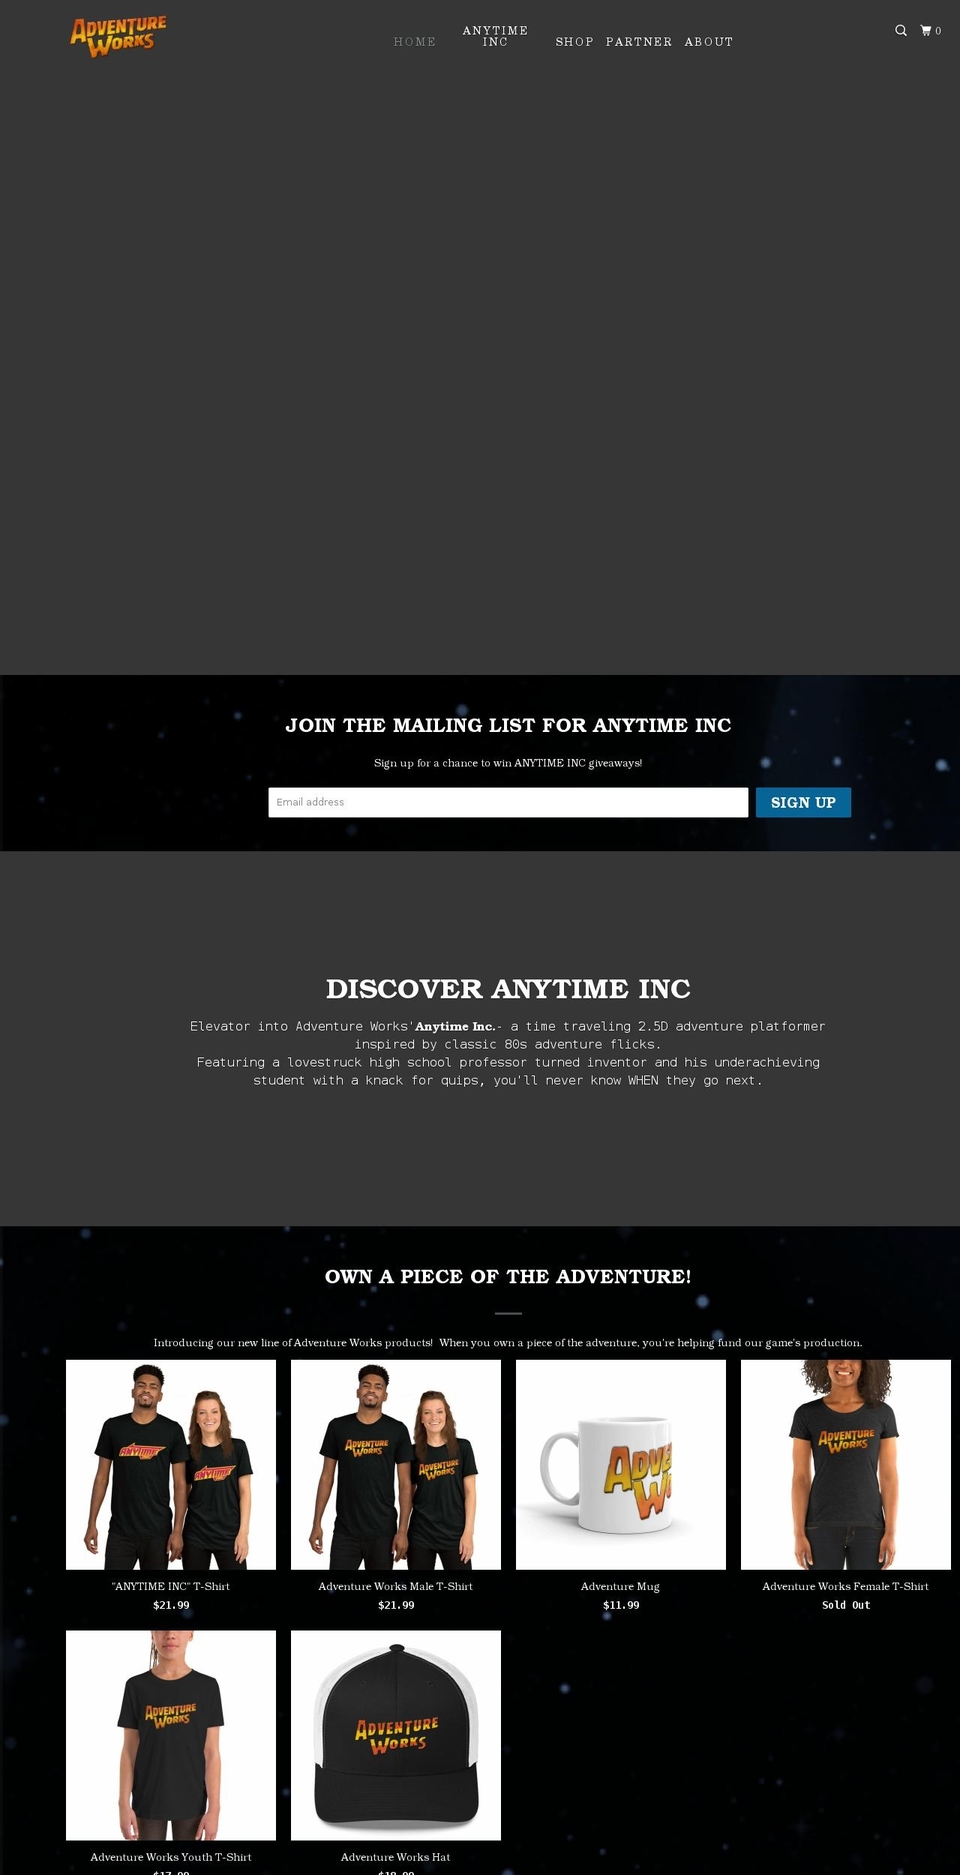 00001 Shopify theme site example adventure.works